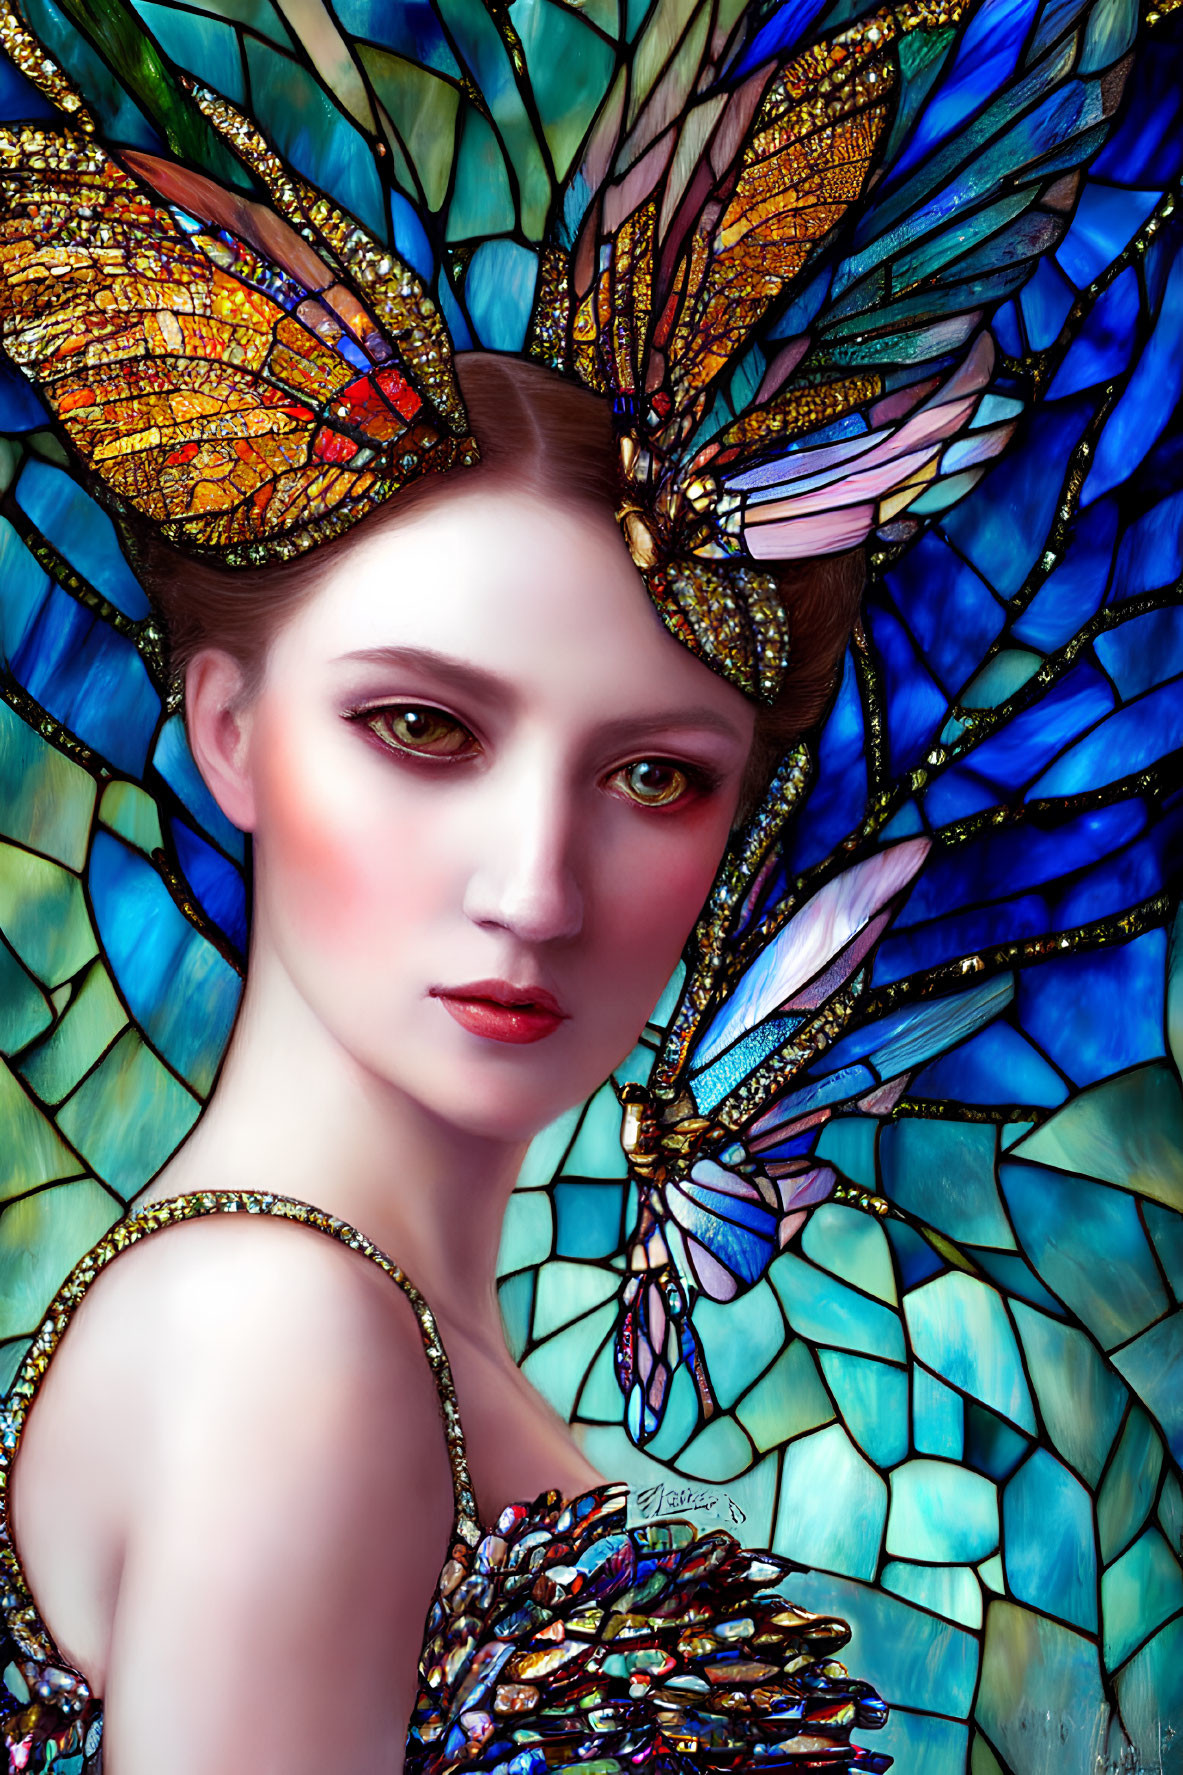 Digital Artwork: Woman with Iridescent Butterfly Wings in Stained Glass Background